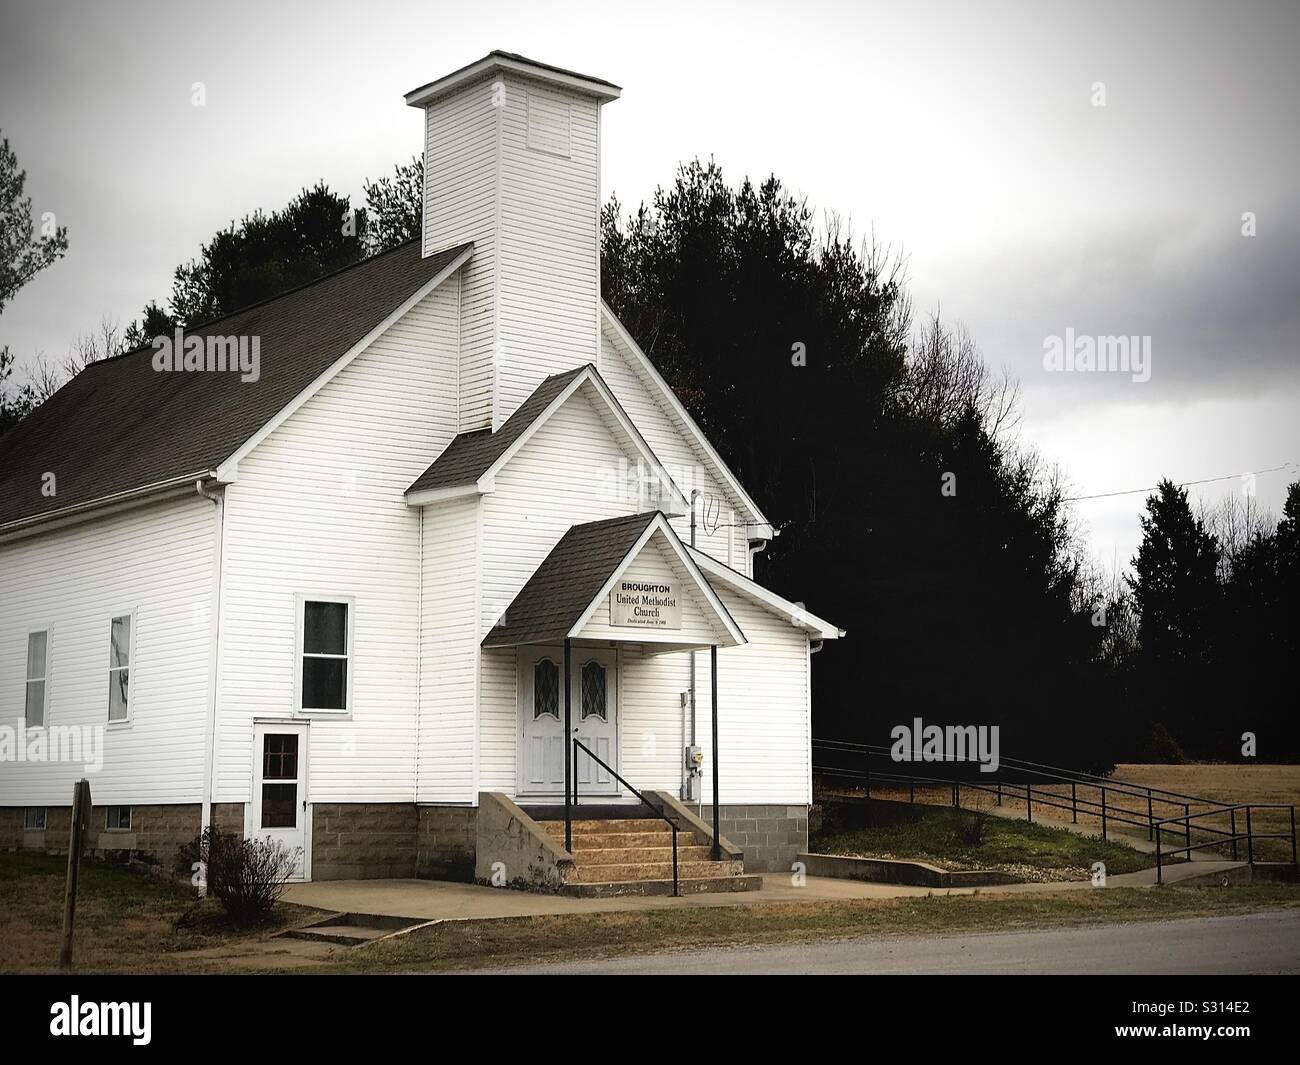 Small church in a small town in the middle of no where. Methodist church in Broughton, Illinois Stock Photo